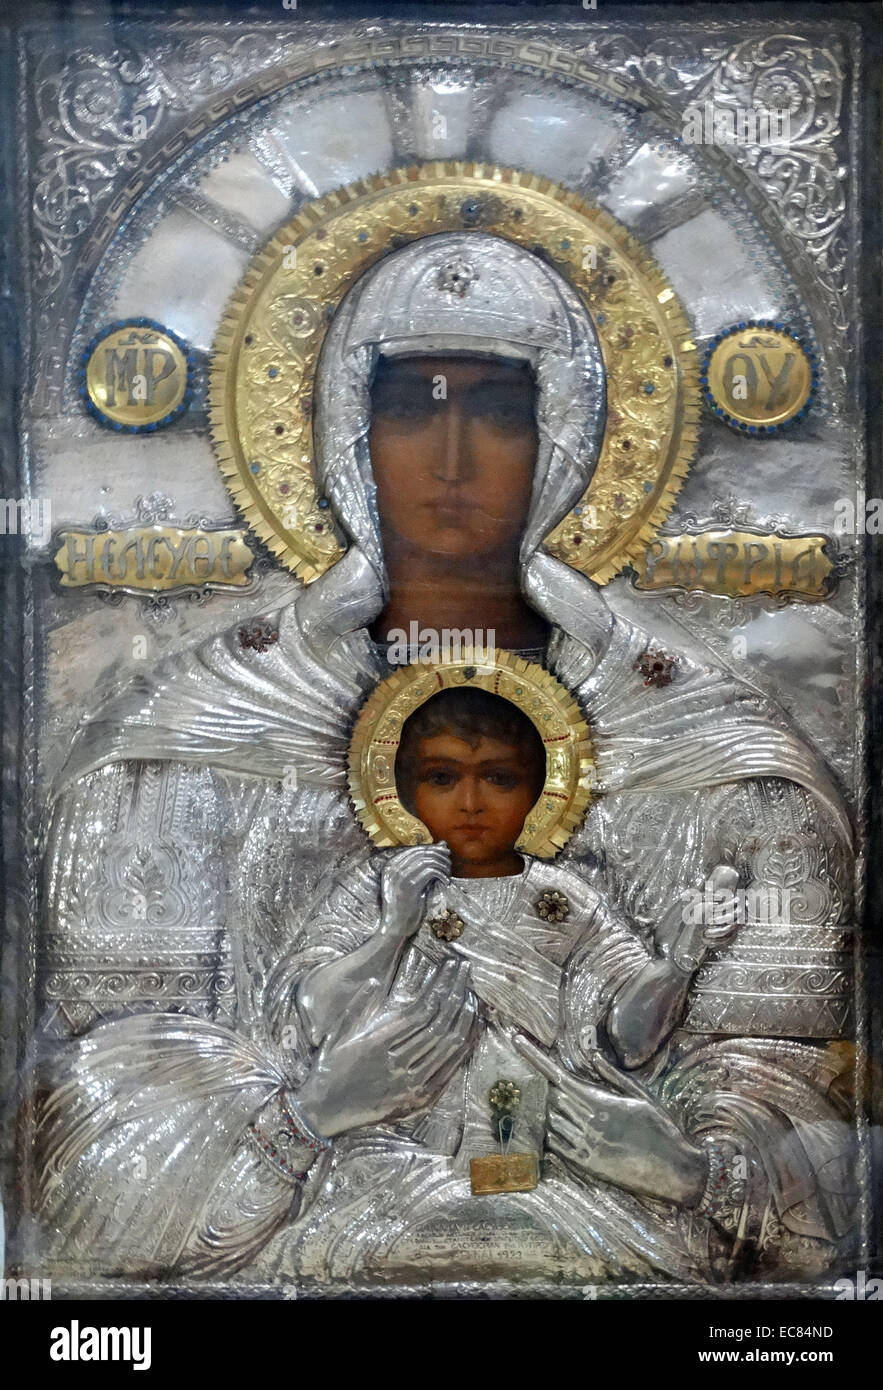 Greek Icon of the Virgin Mary with Christ in the Church of the Holy Sepulchre in Jerusalem. This church is identified as the place both of the crucifixion and the tomb of Jesus of Nazareth; originally built by the mother of Emperor Constantine in 330 A.D. The original Byzantine church was destroyed by the Persians in A.D. 614. Stock Photo